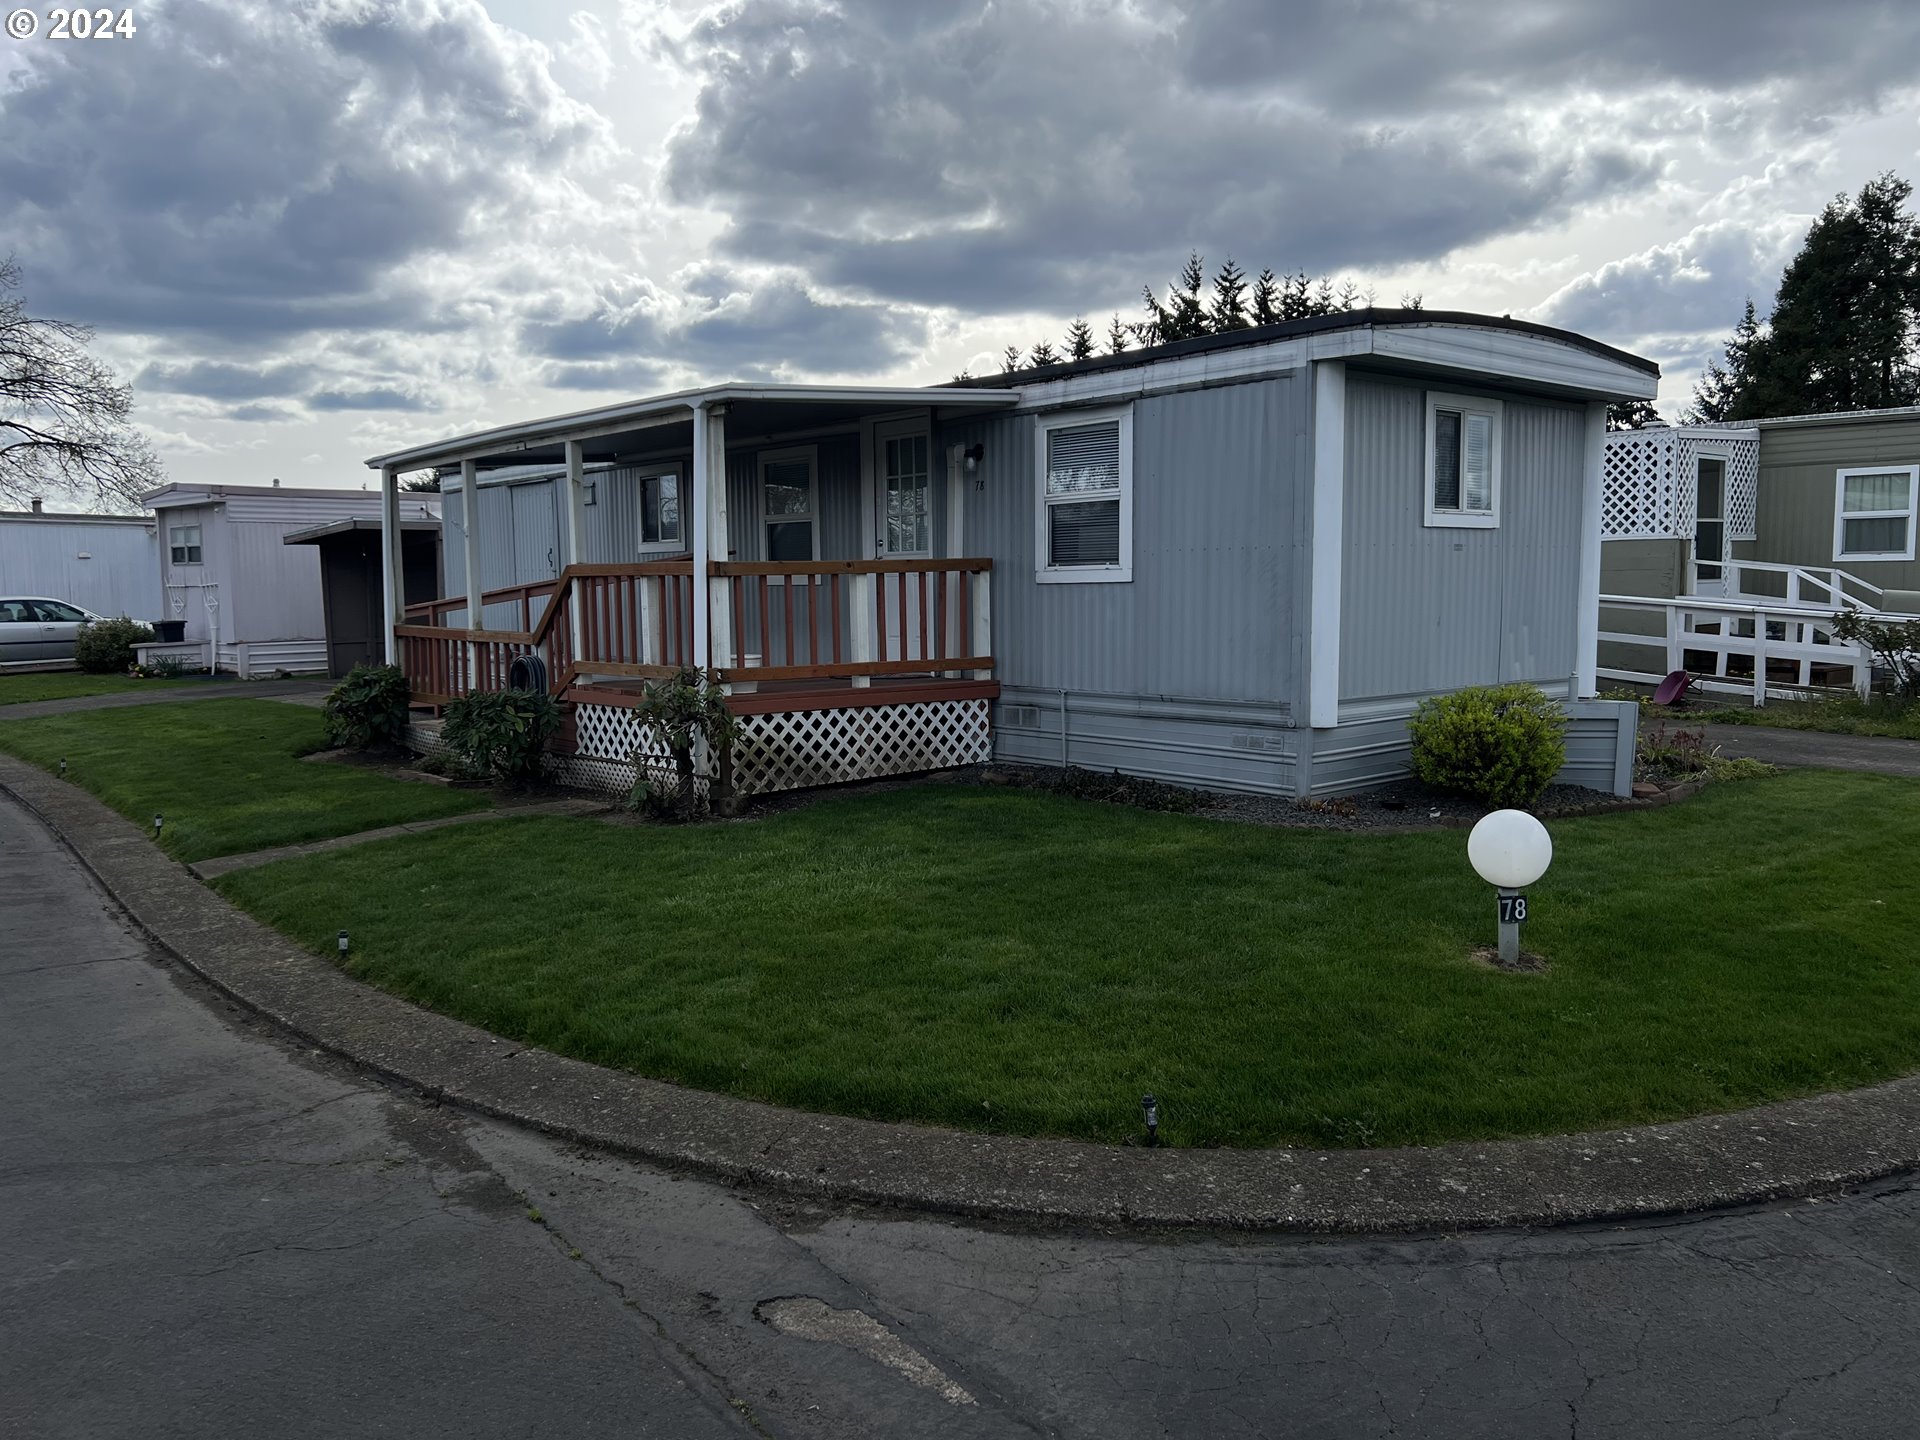 2150 LAURA ST 78, Springfield, OR 